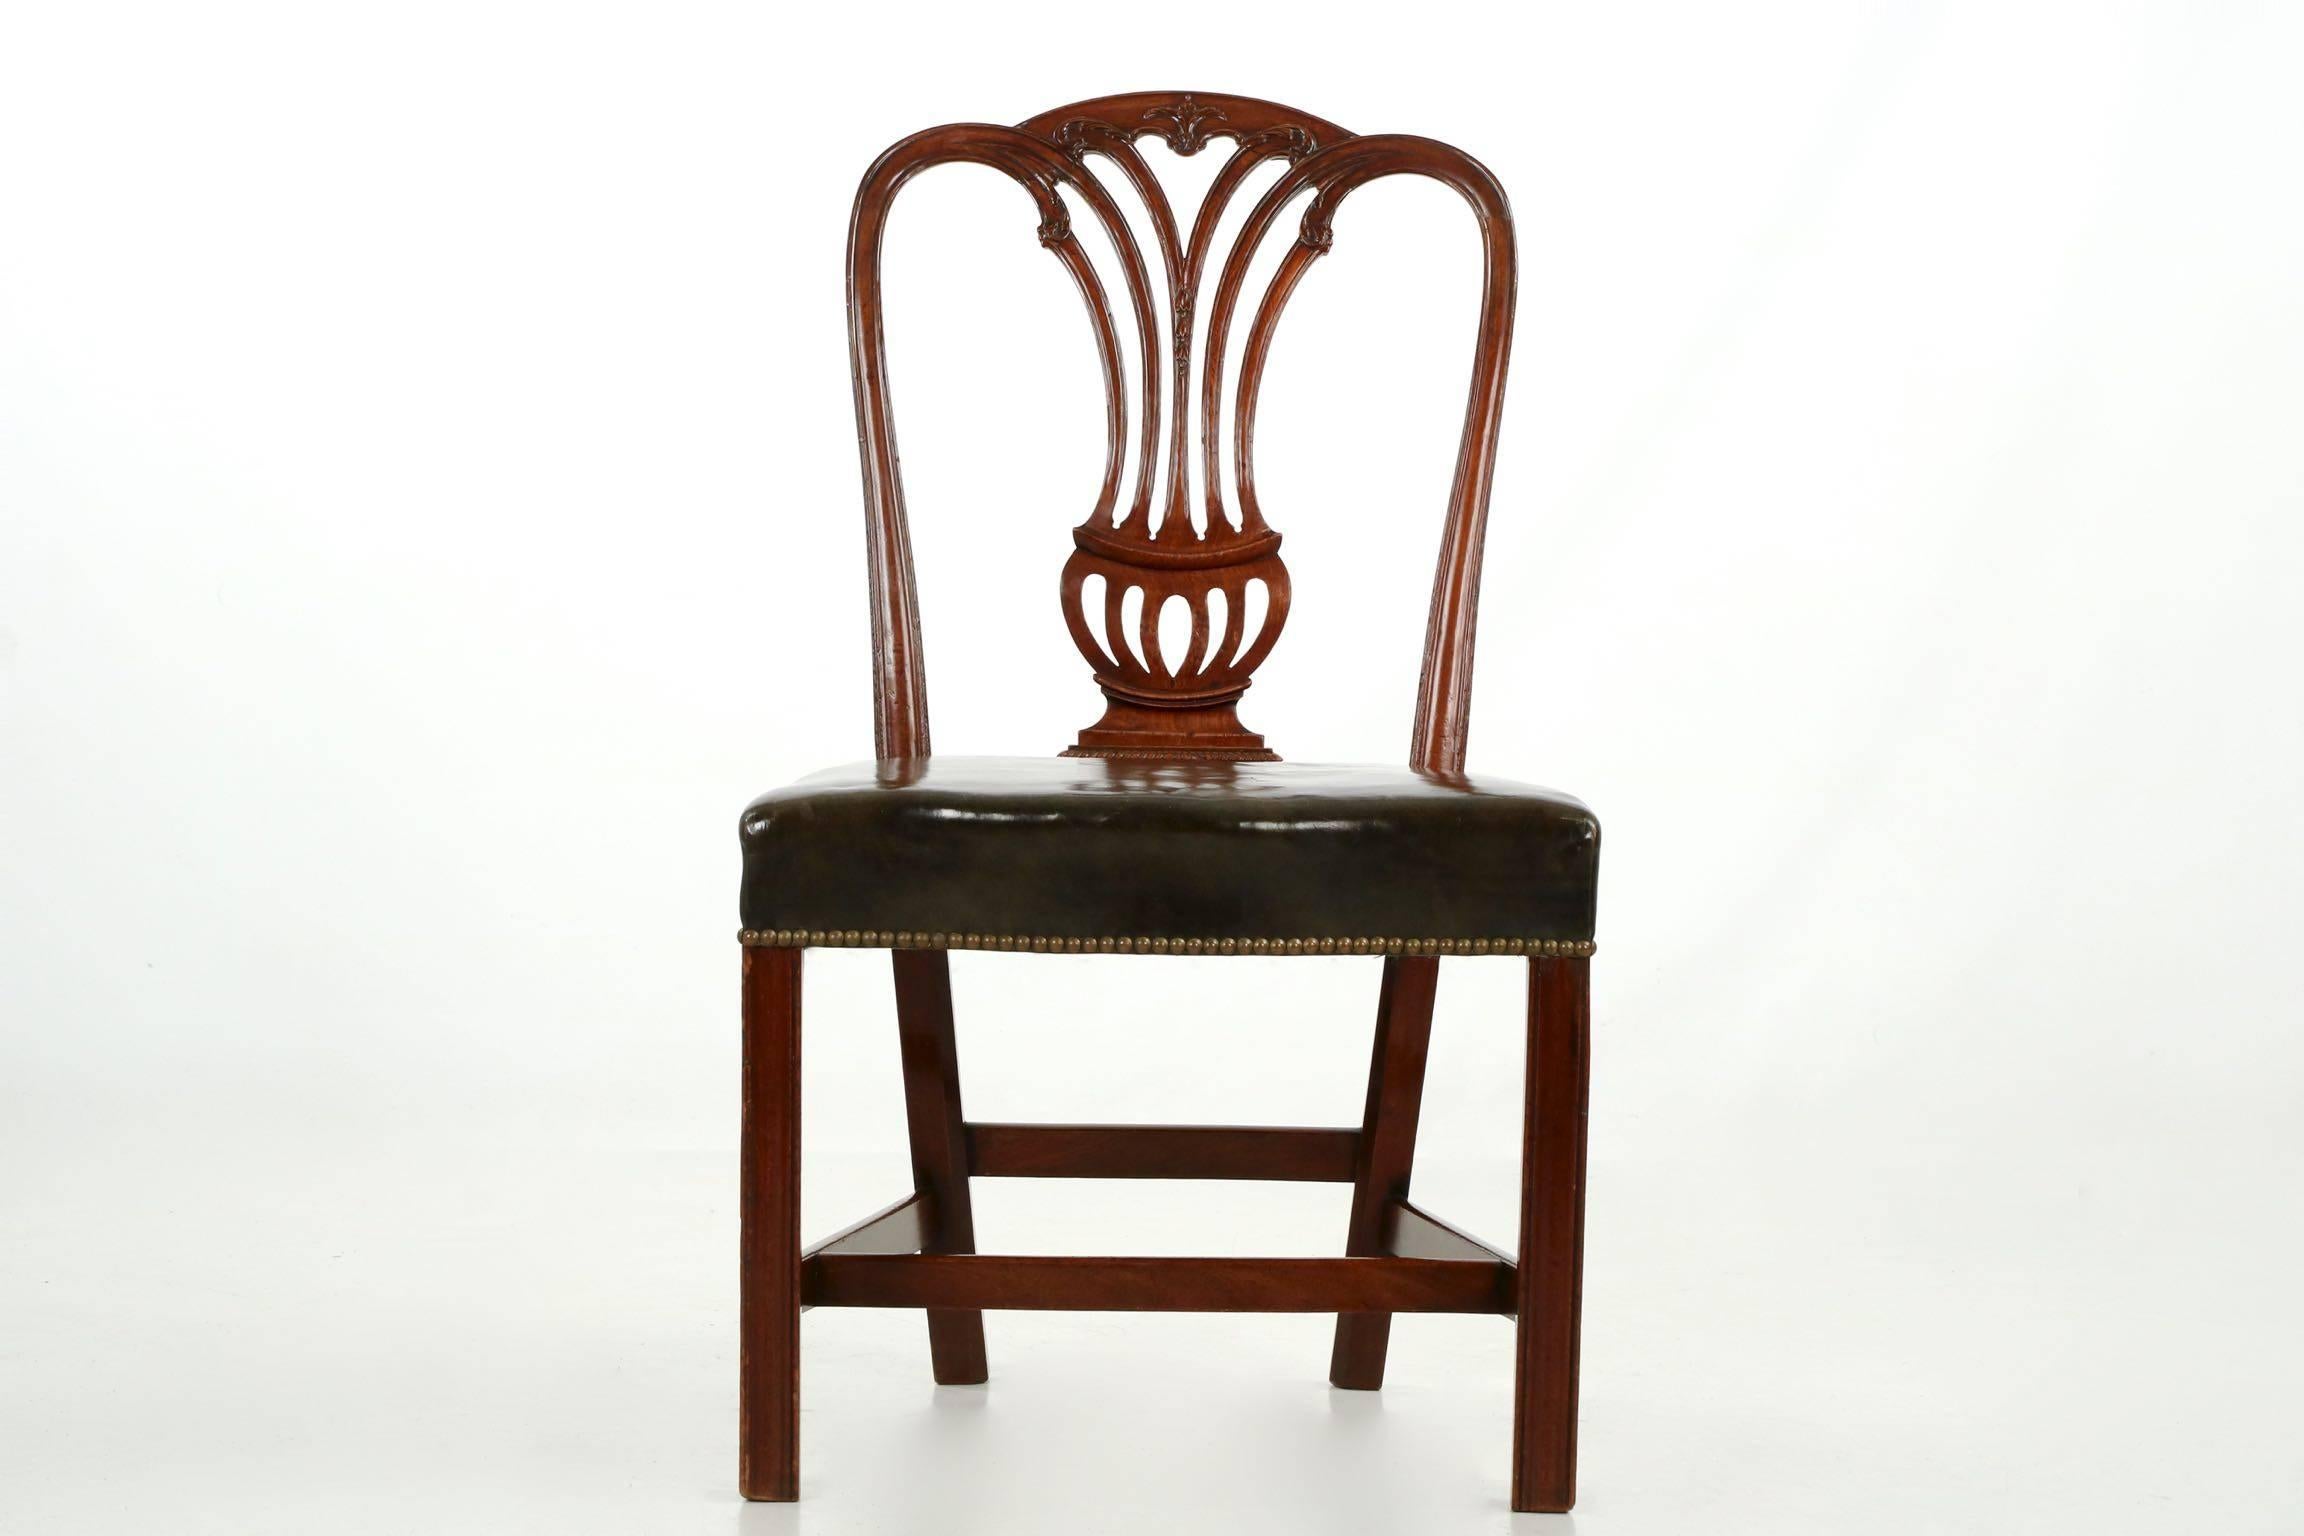 Of masculine form and proportions, this fine Georgian period side chair features a fully developed vasiform splat with intricate displays of carved foliage sprouting from the tips of the pierced splat ventricles, these rising in a dramatic outward